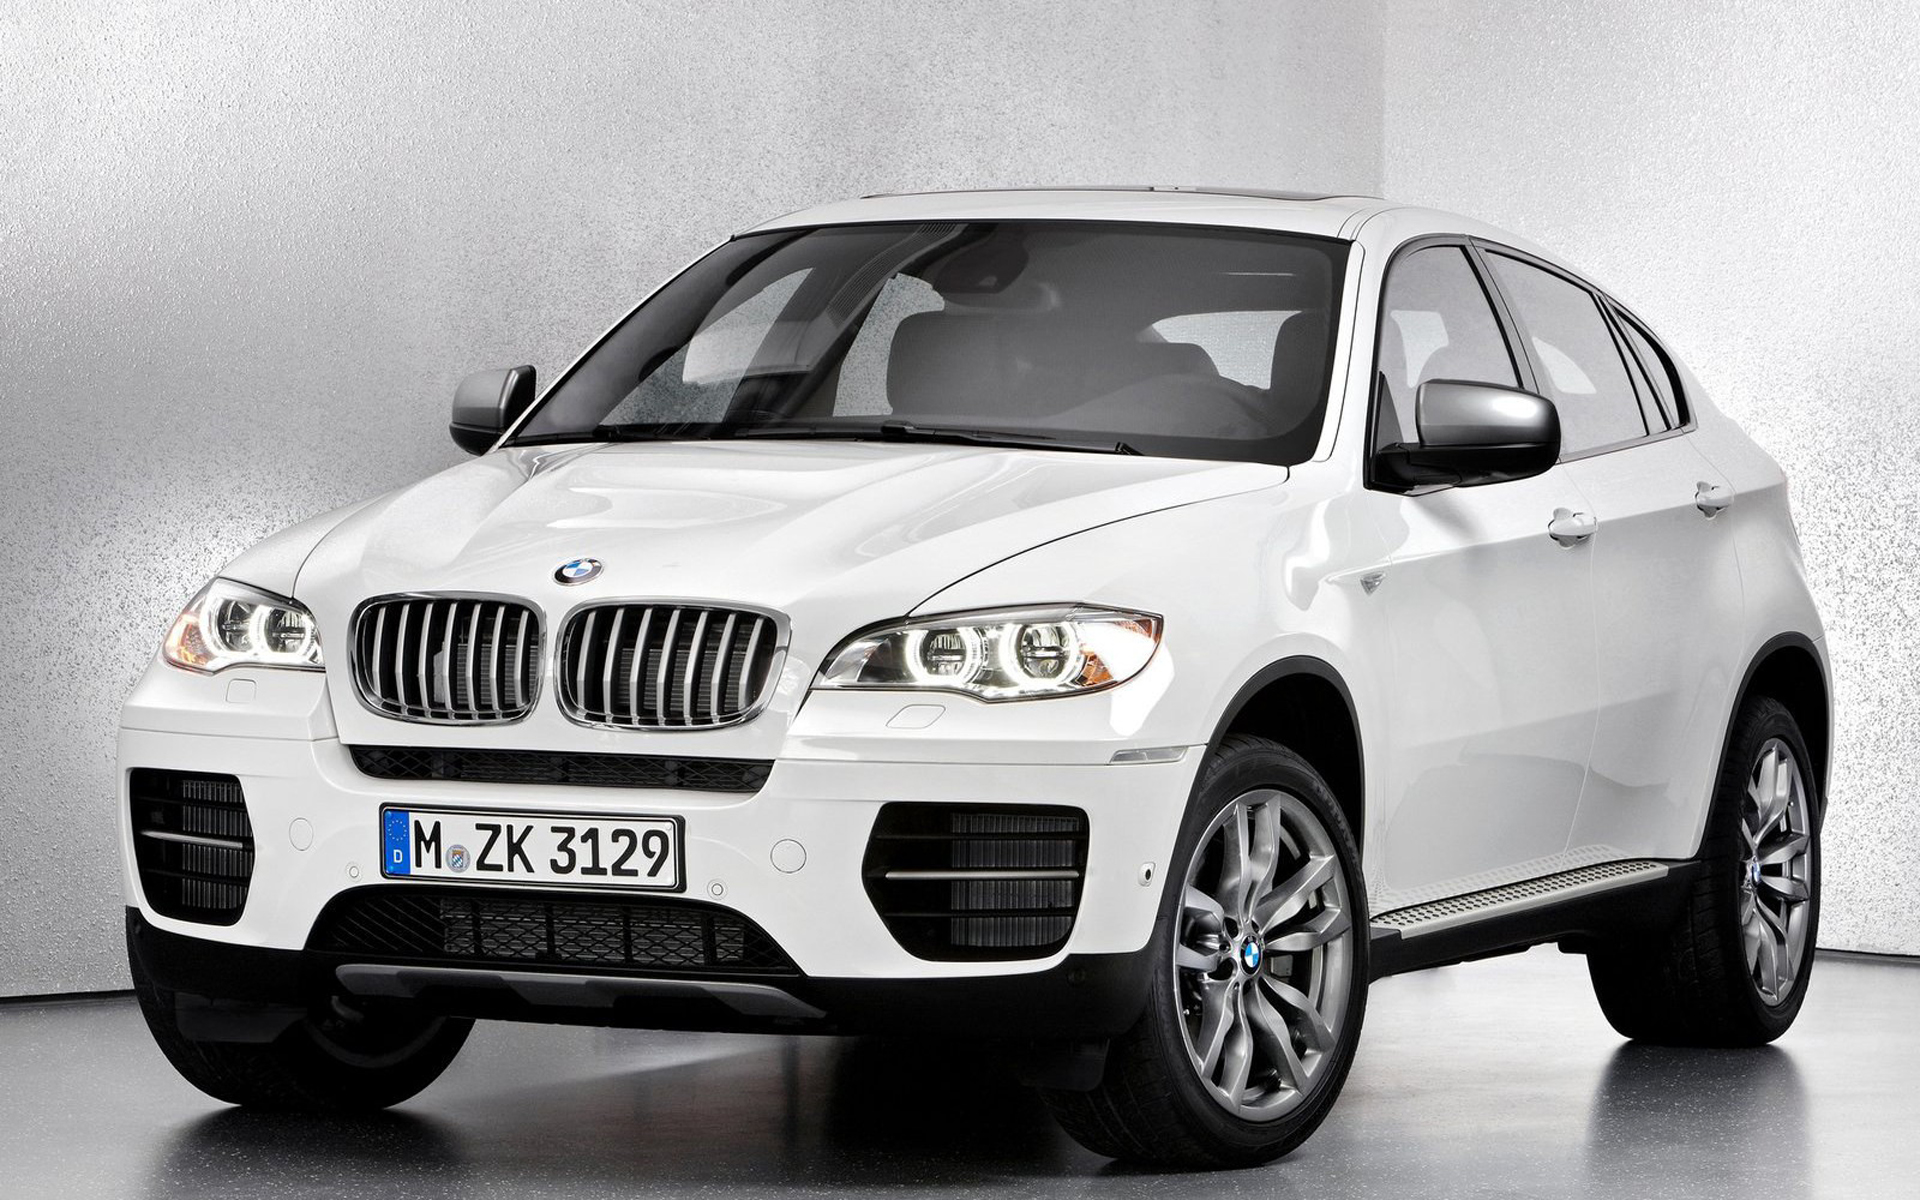 Wallpapers bmw x6 SUV on the desktop